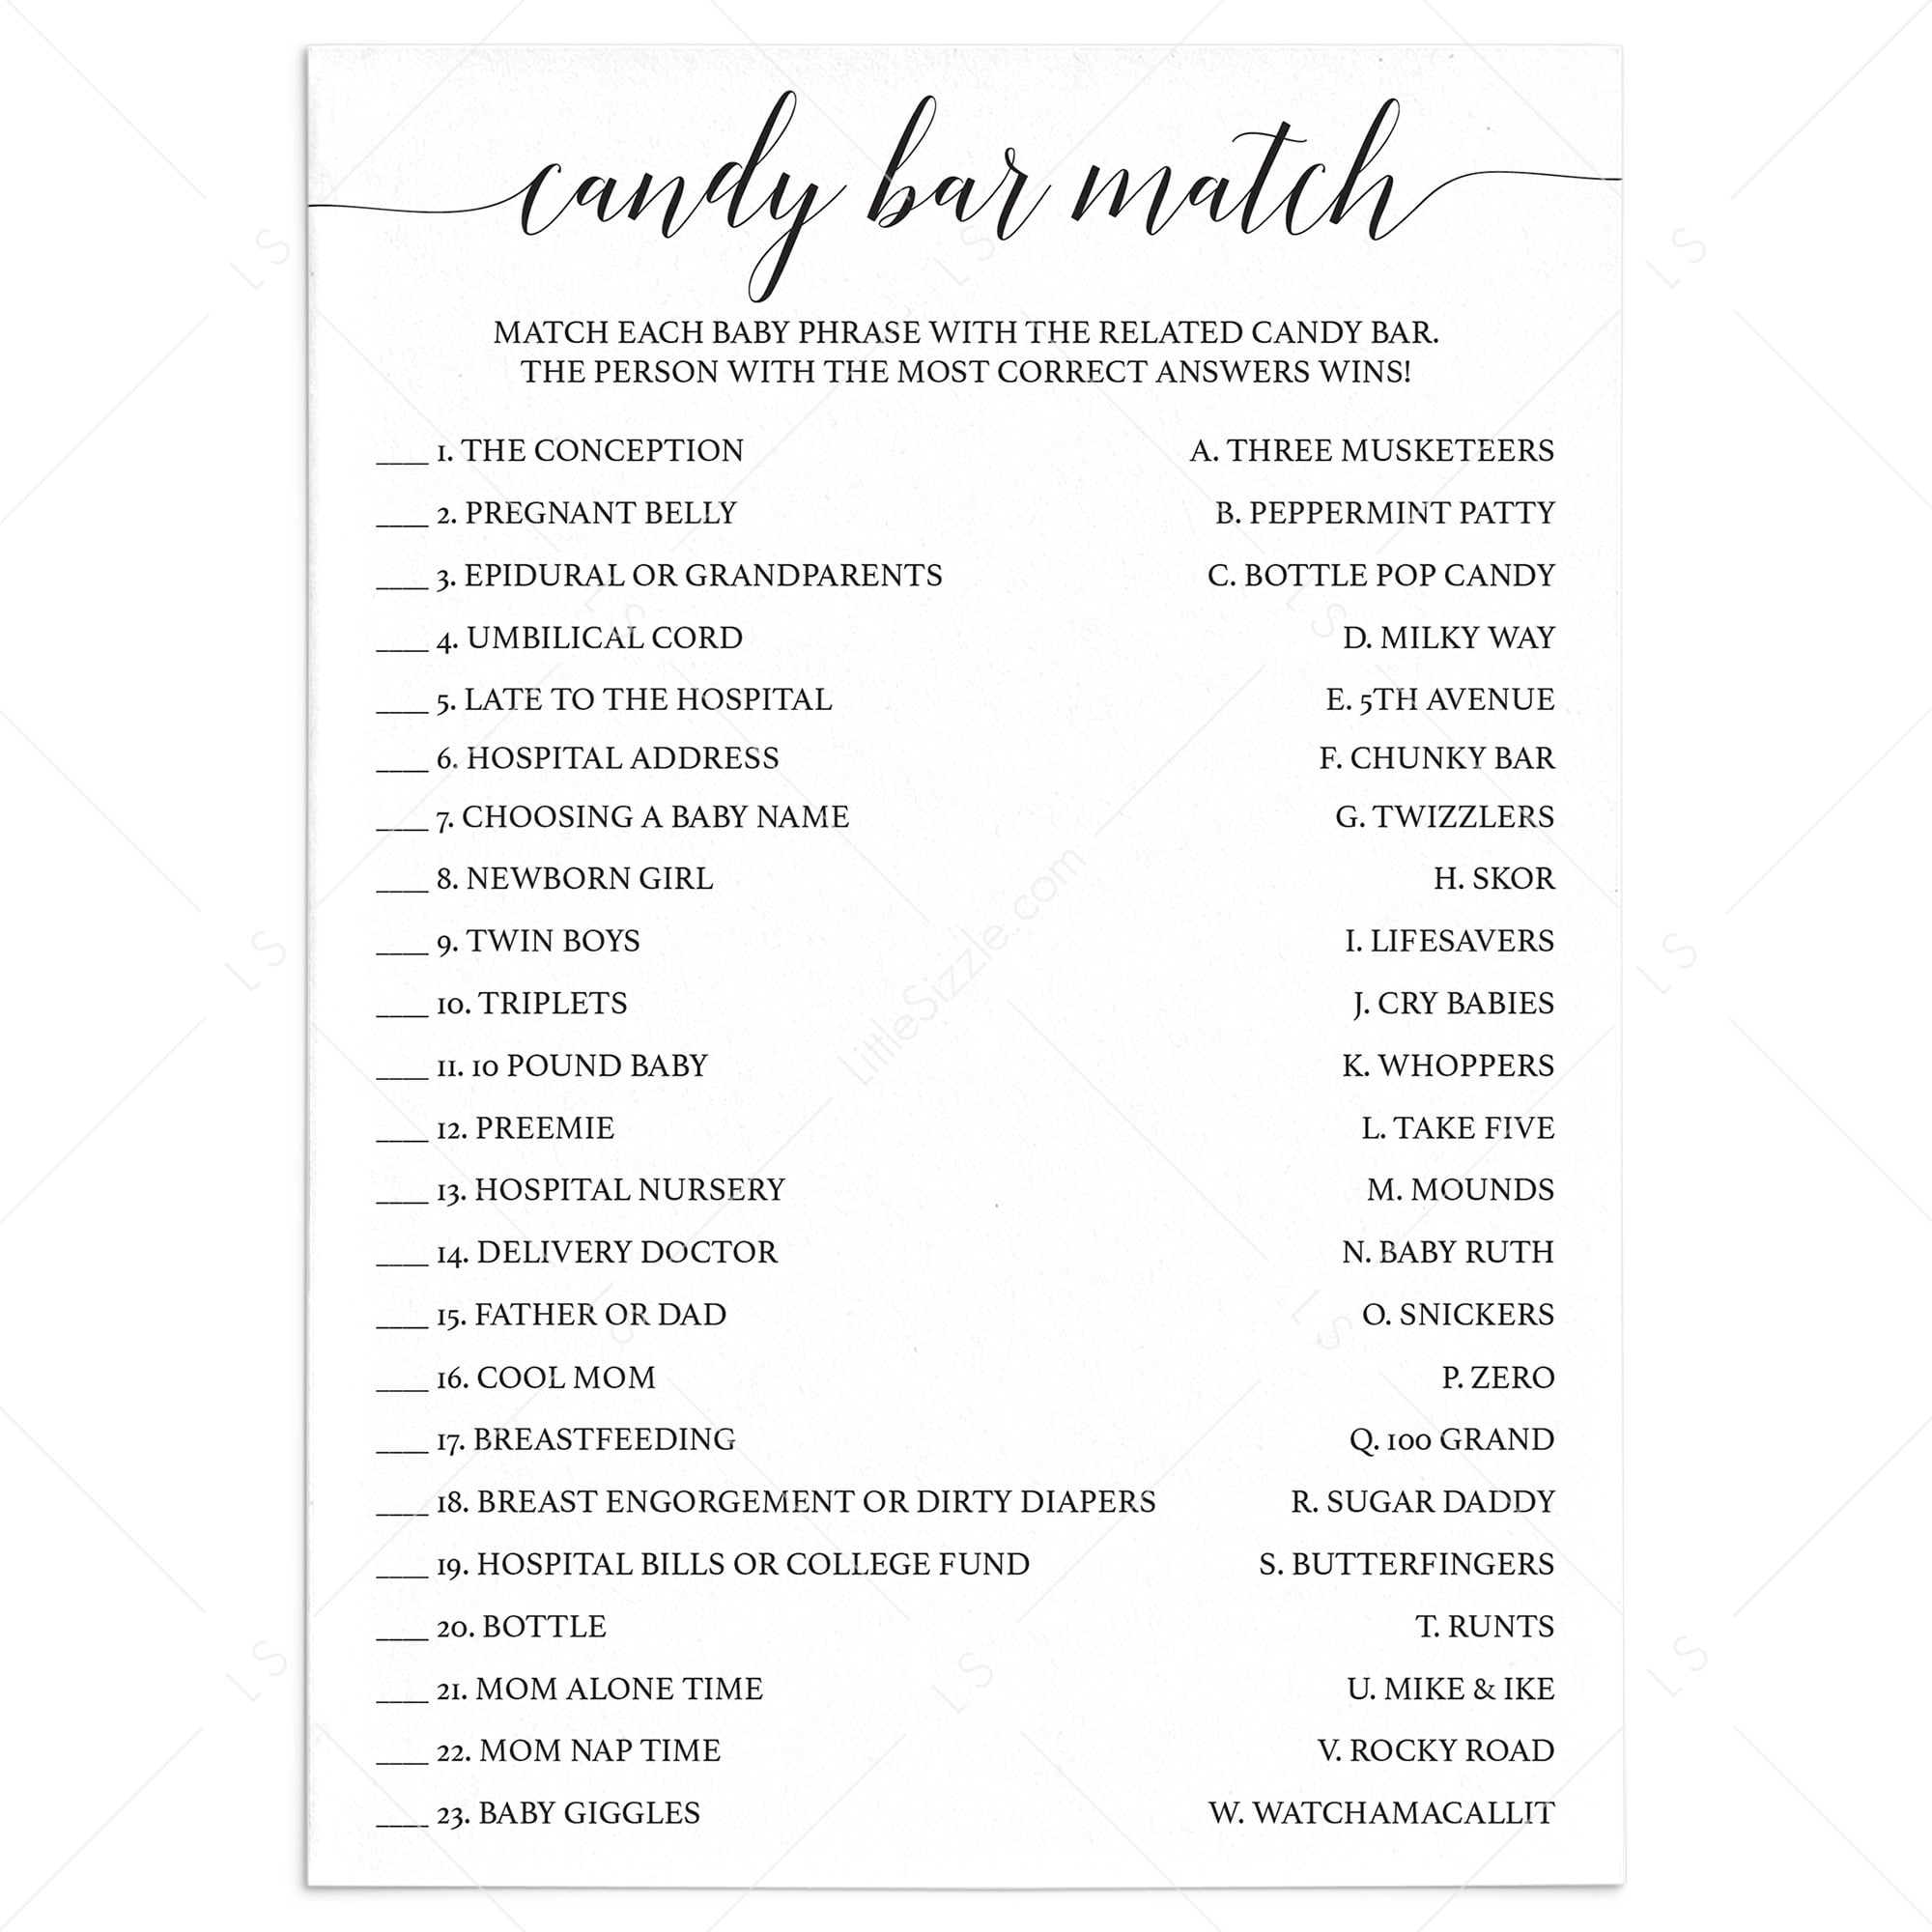 Candy bar match up baby shower game by LittleSizzle